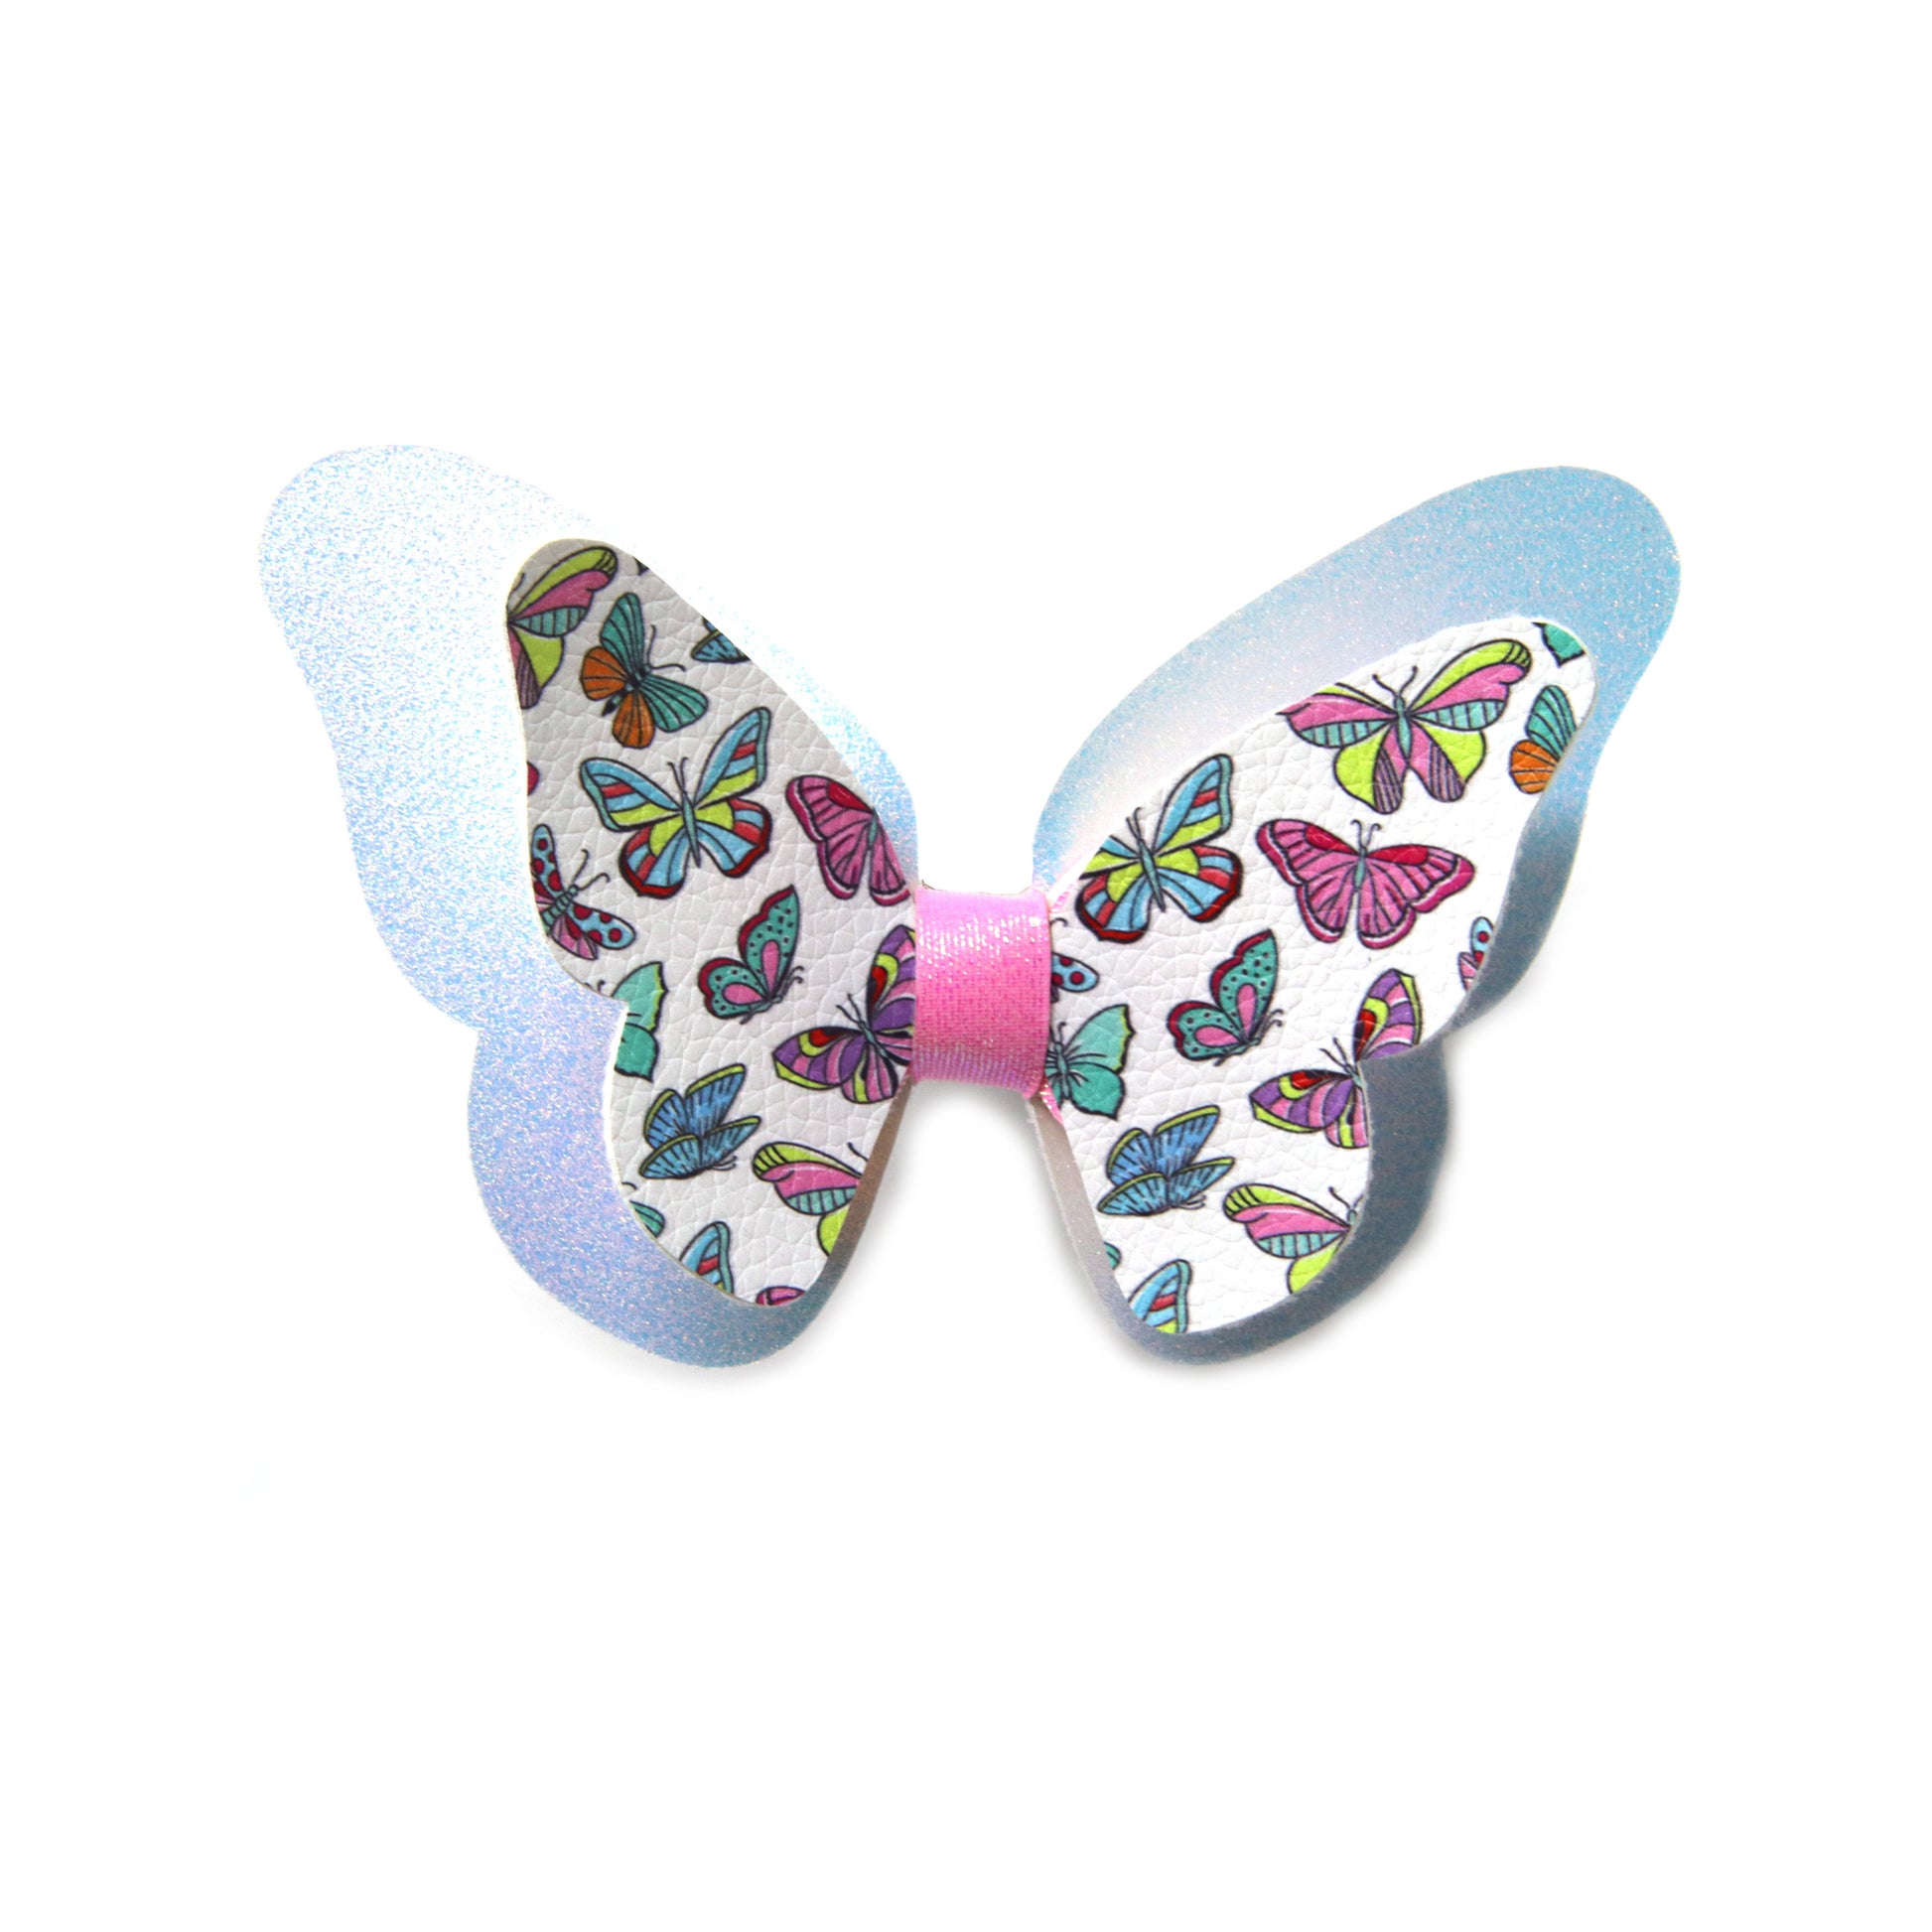 3.5 inch Silvermist Butterfly Bow - Waterfall Wishes